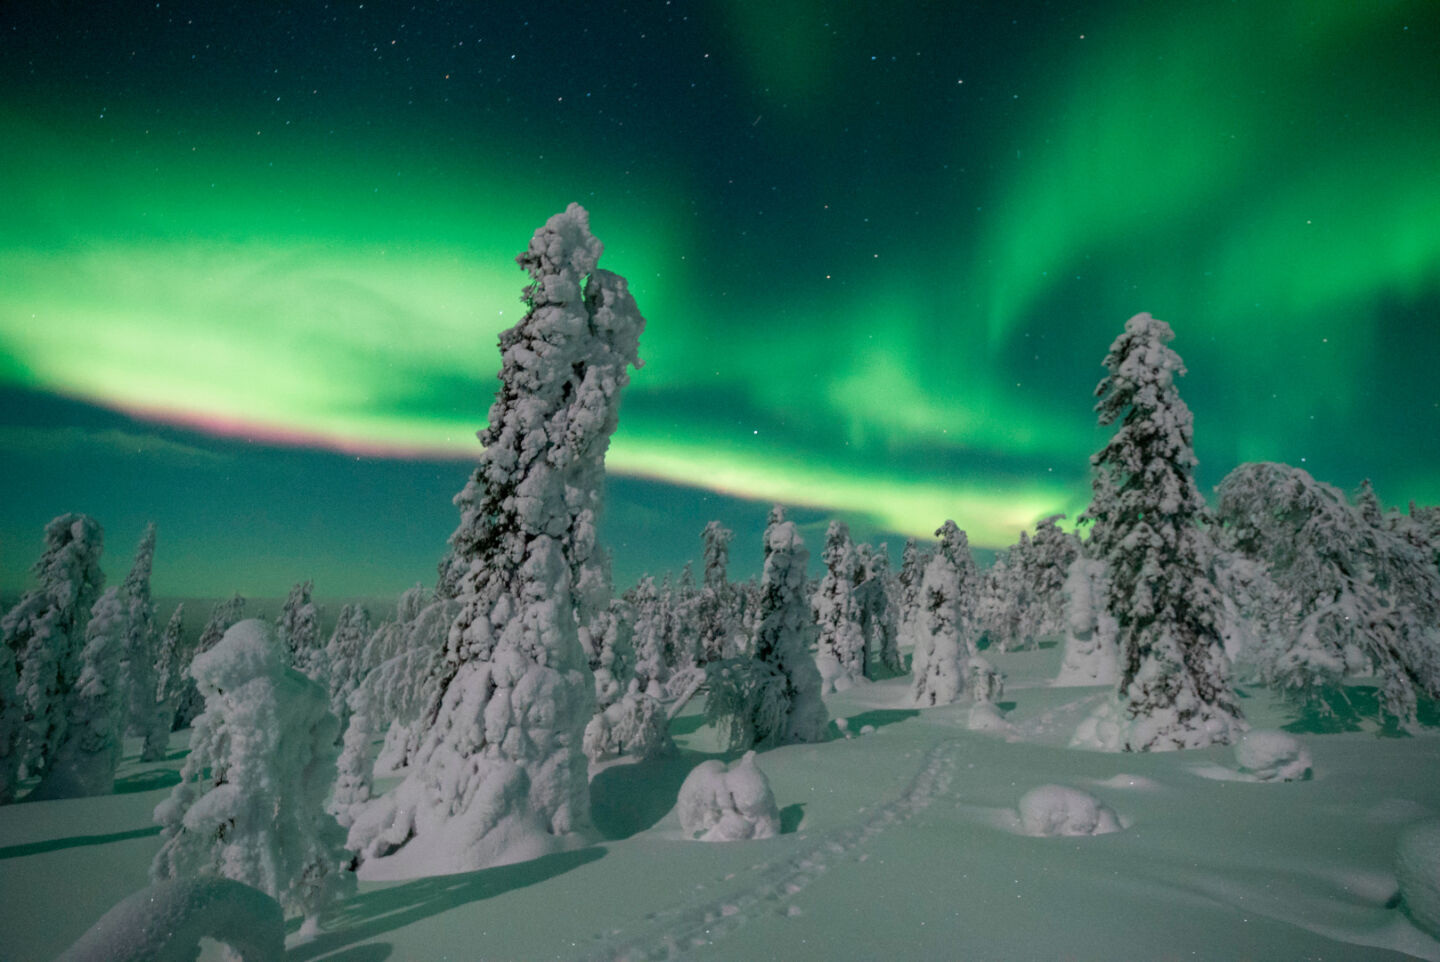 Filming Northern Lights? You can't do better than the auroras above Finnish Lapland